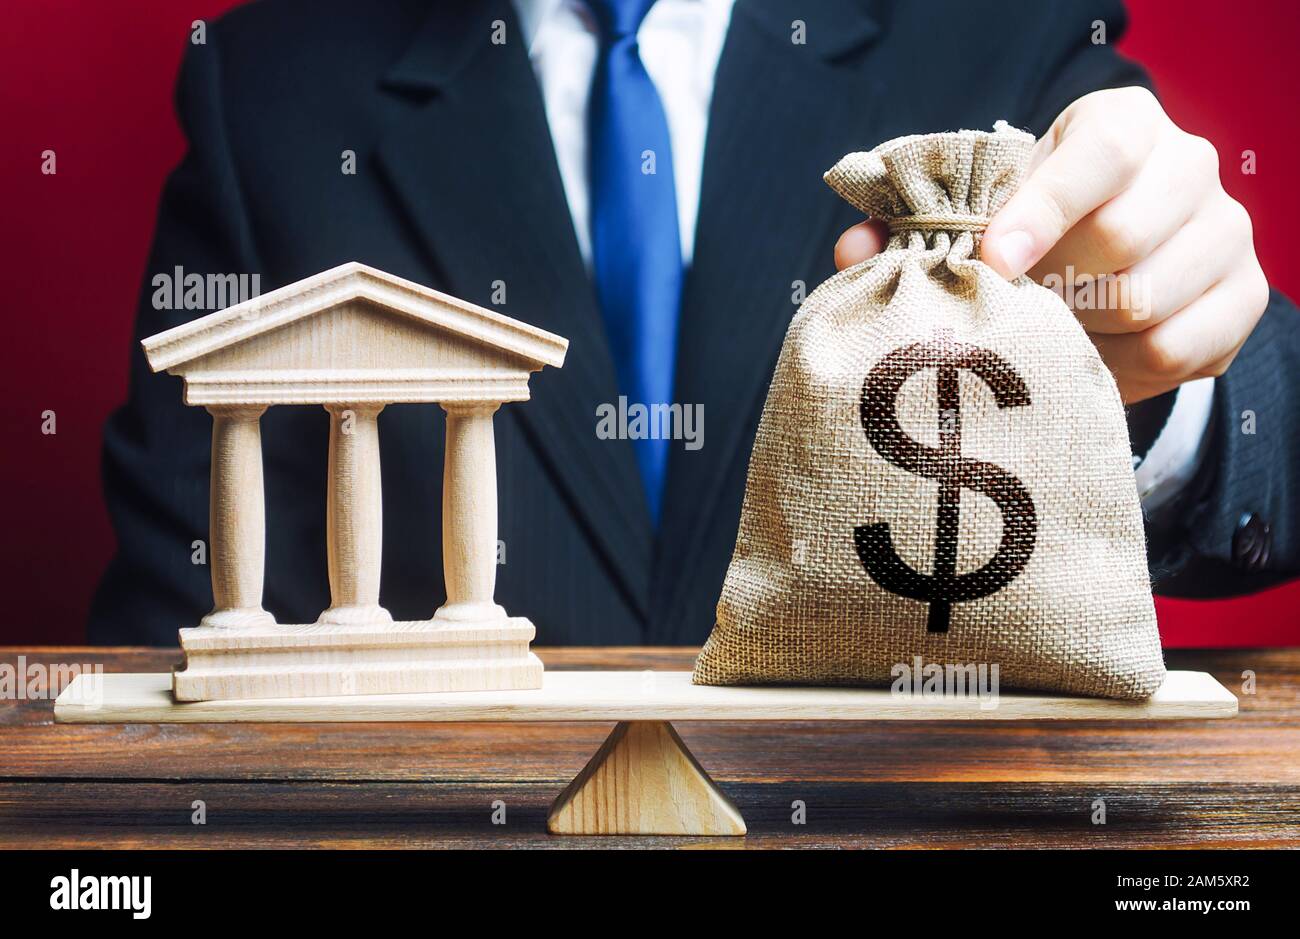 A man puts a money bag on scales opposite to building of government, bank, university. Budget and funding for normal functioning. Lobbying interests. Stock Photo